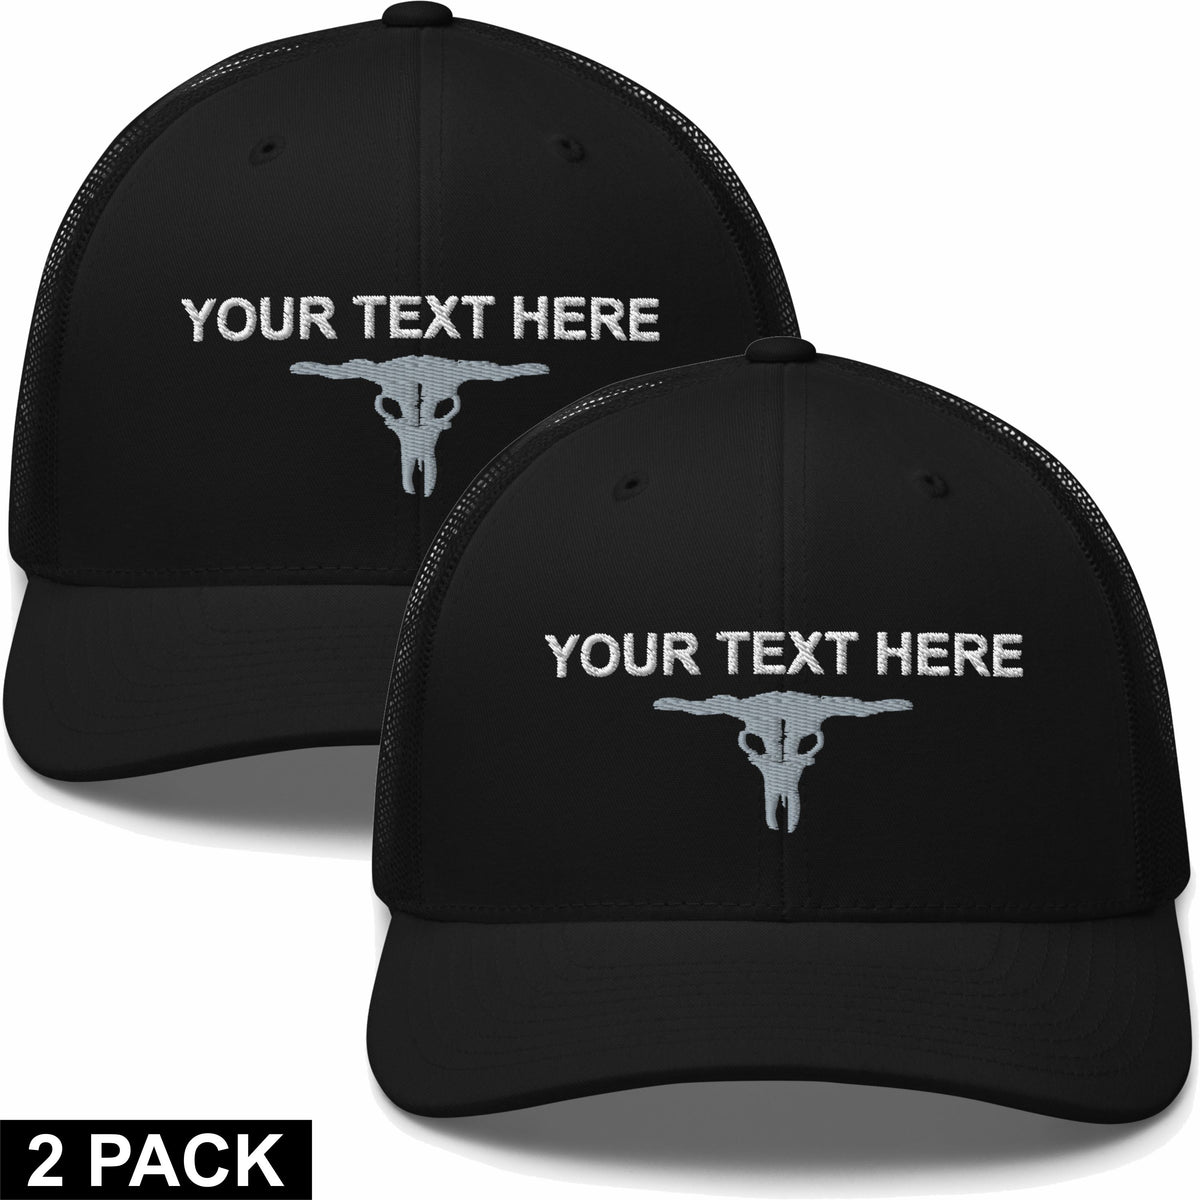 2 Embroidered Hats - Bull Skull - Your Text Here - Free Shipping